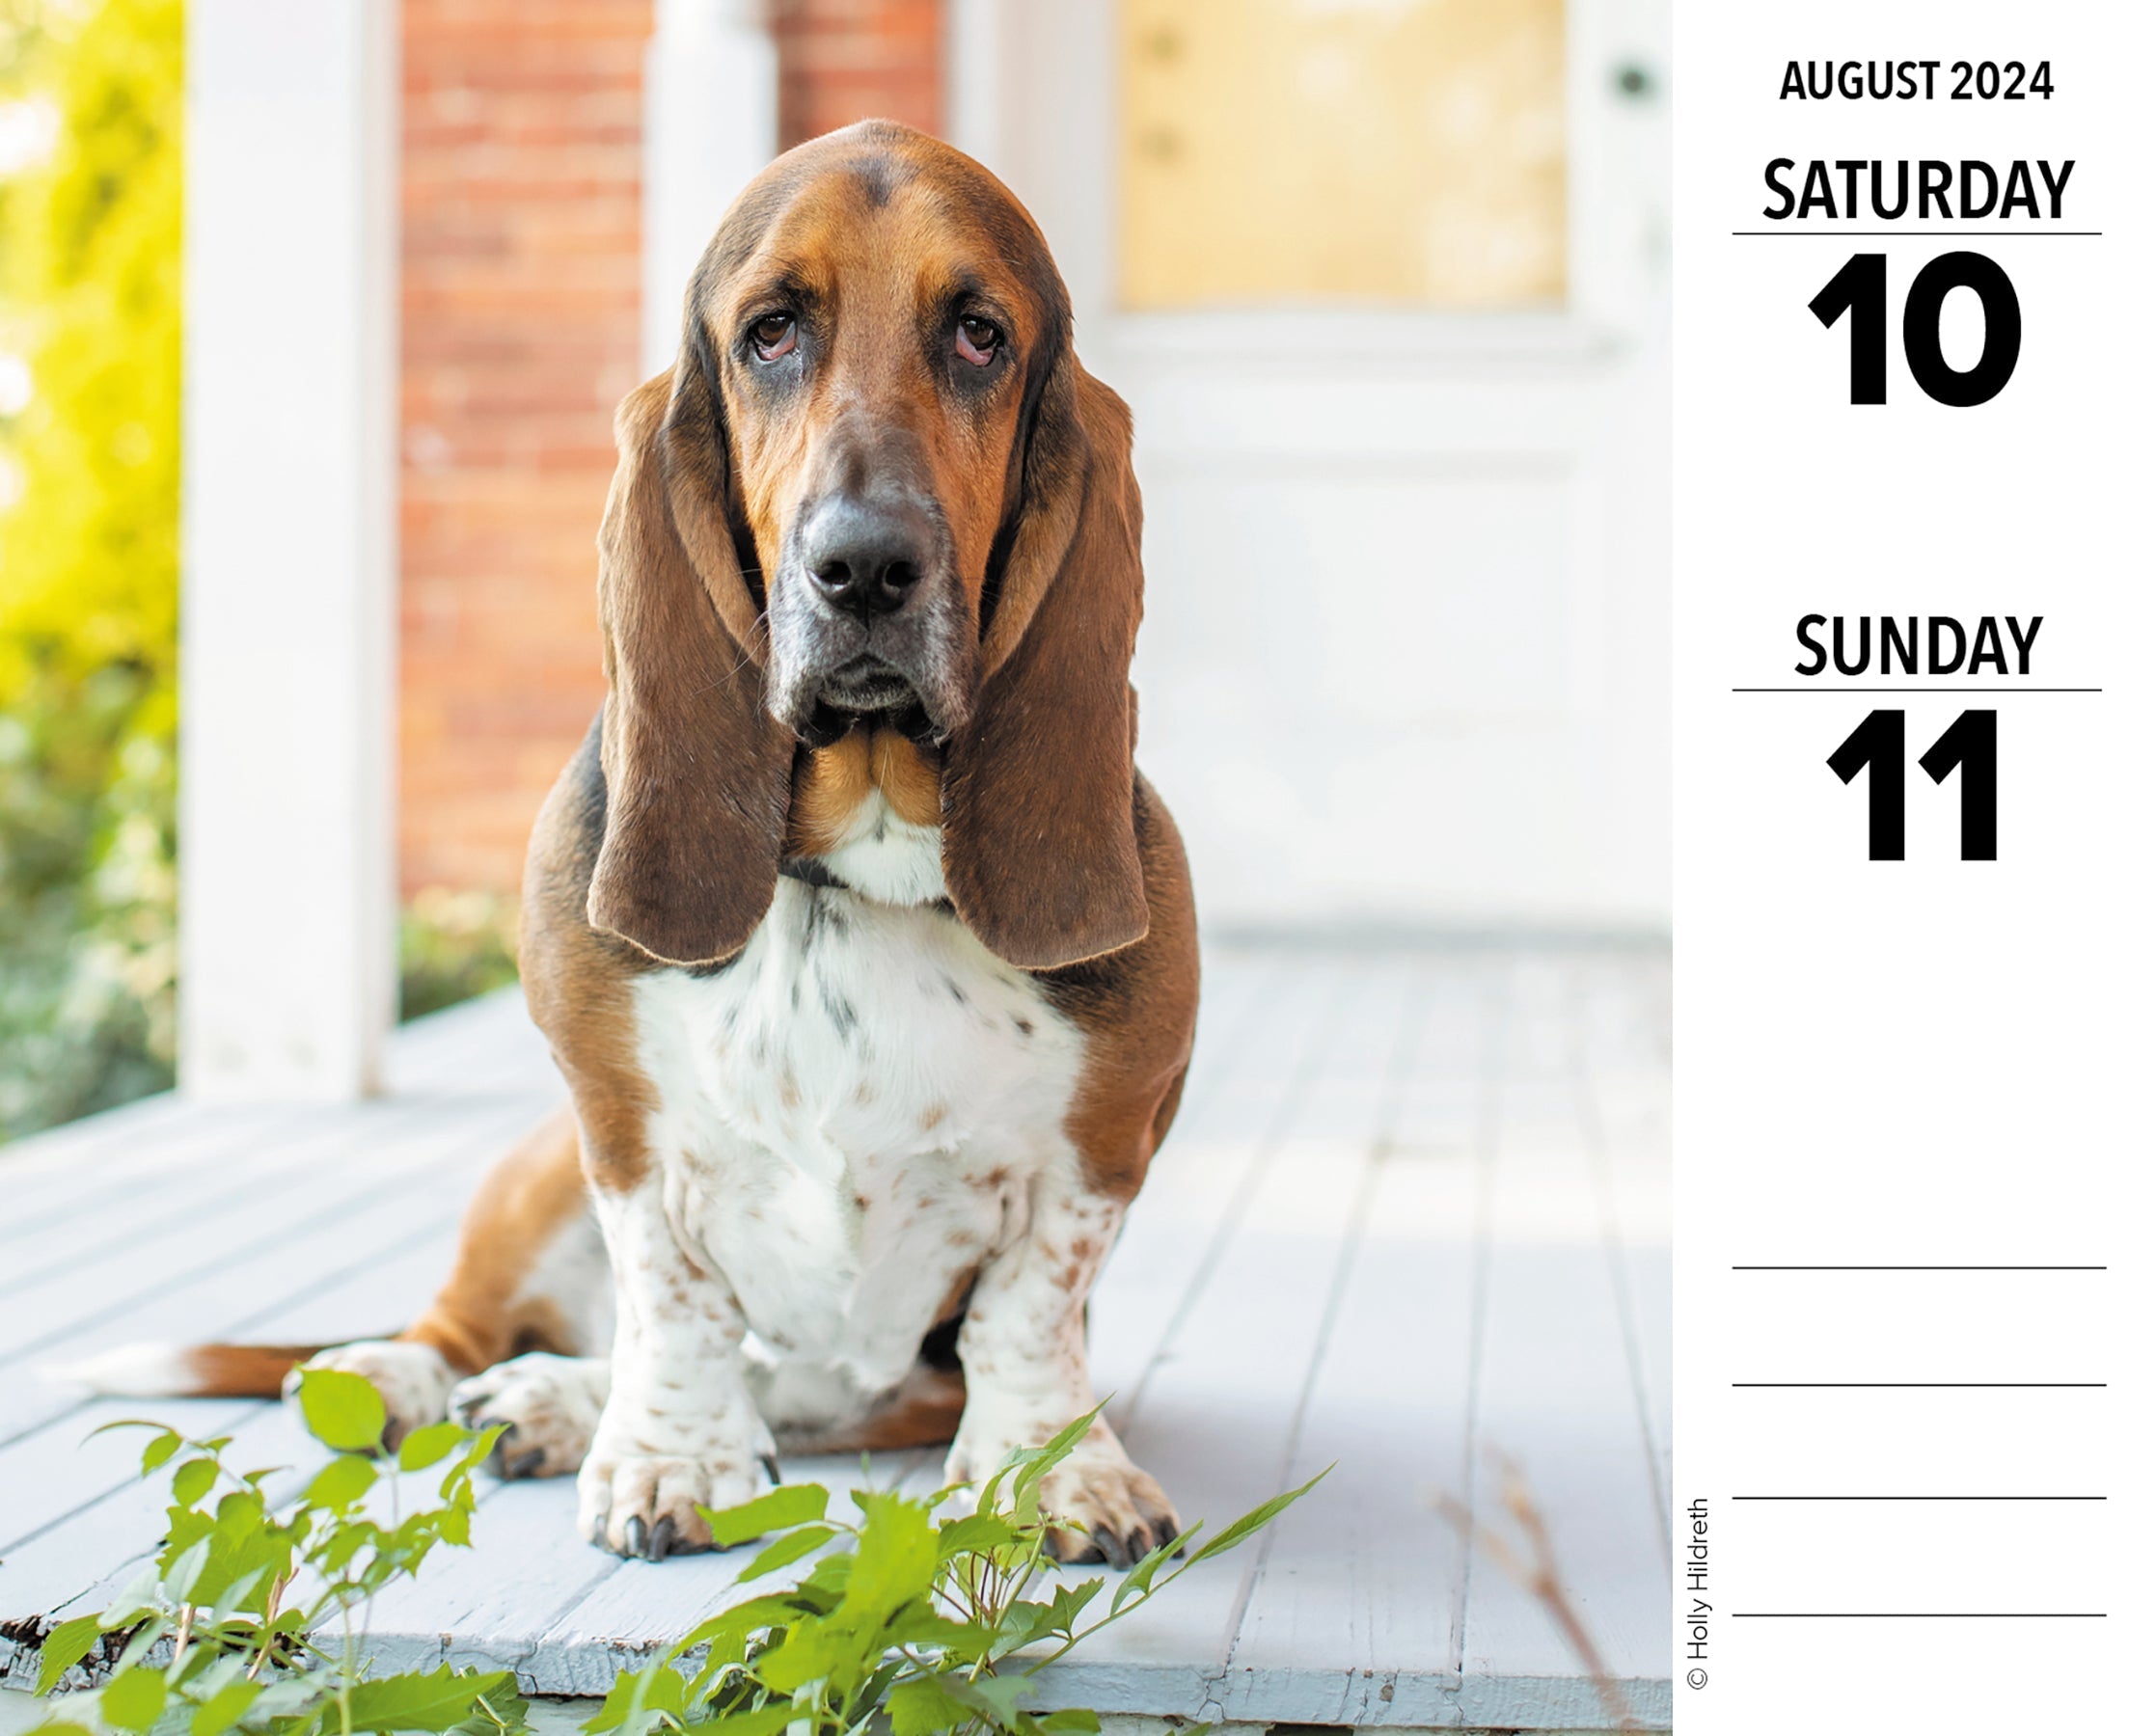 2024 Basset Hounds - Daily Boxed Page-A-Day Calendar US